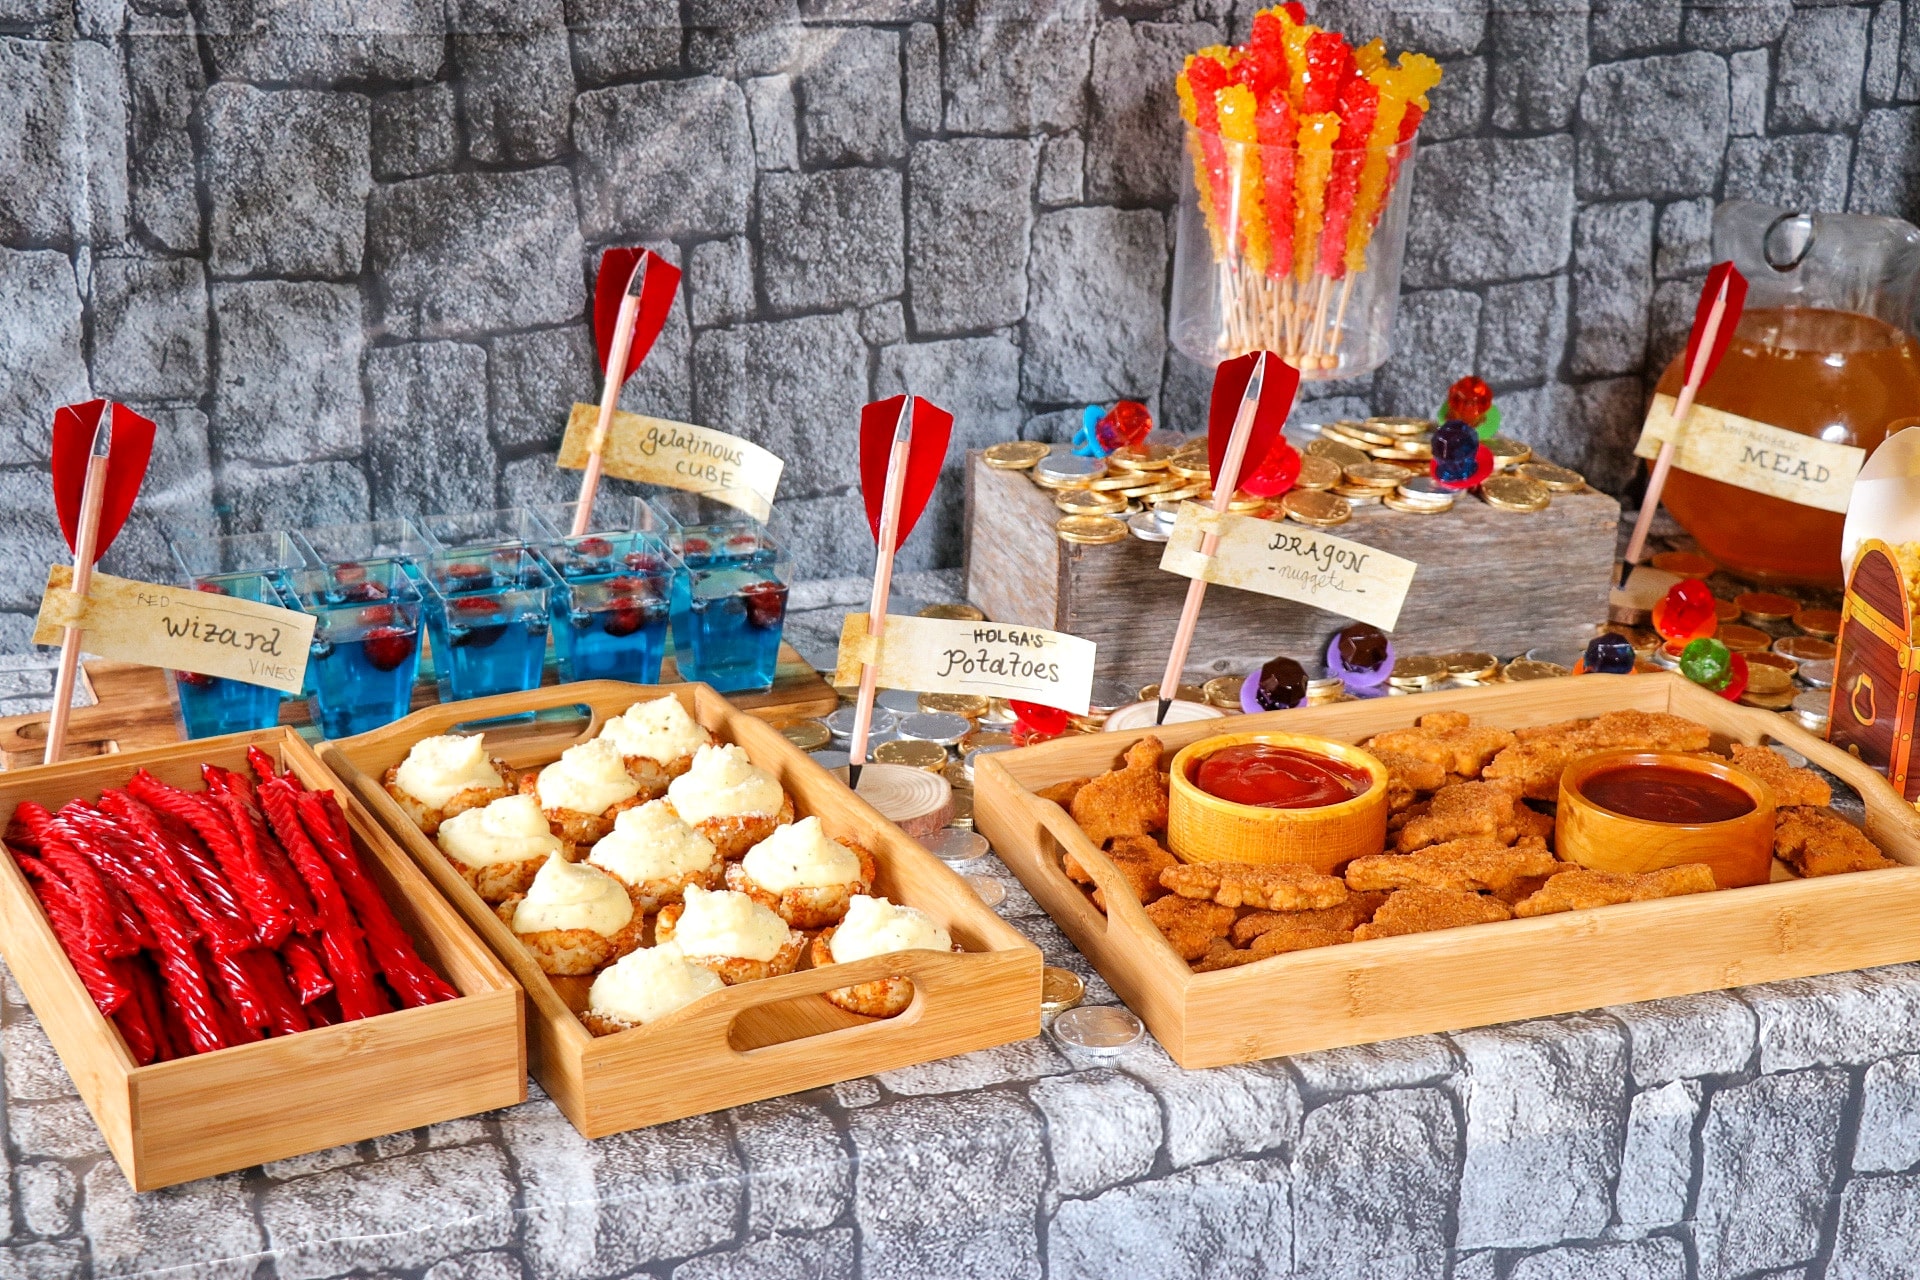 Food for a Dungeons and Dragons birthday party